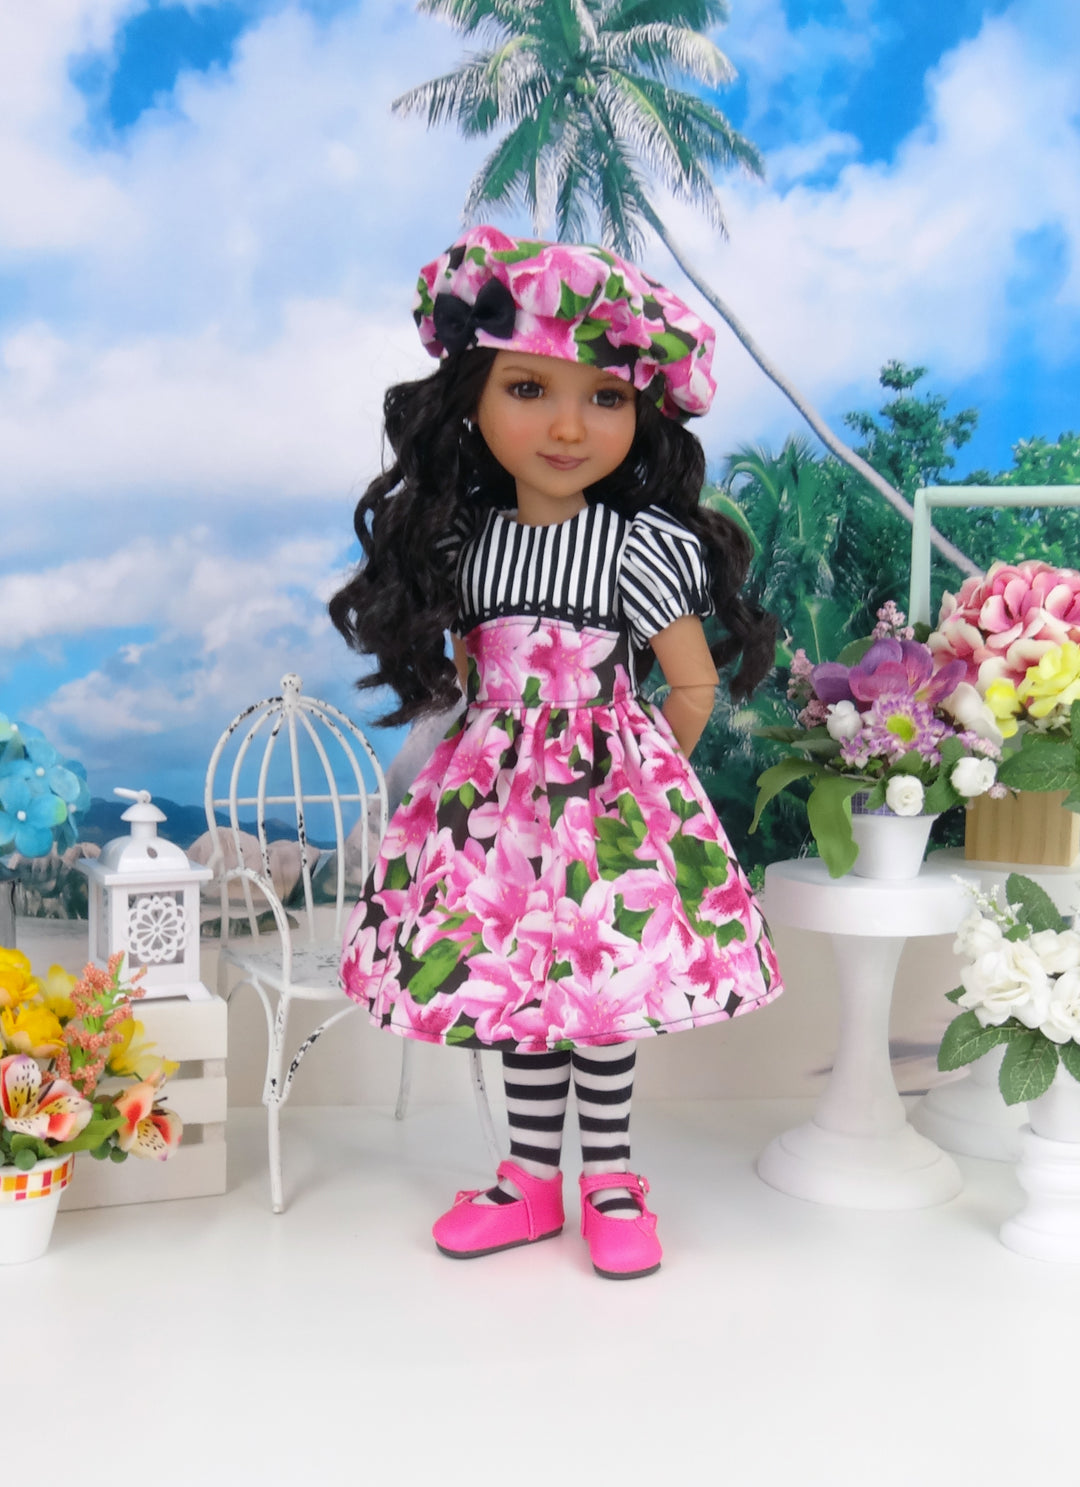 Stargazer Lily - dress and shoes for Ruby Red Fashion Friends doll